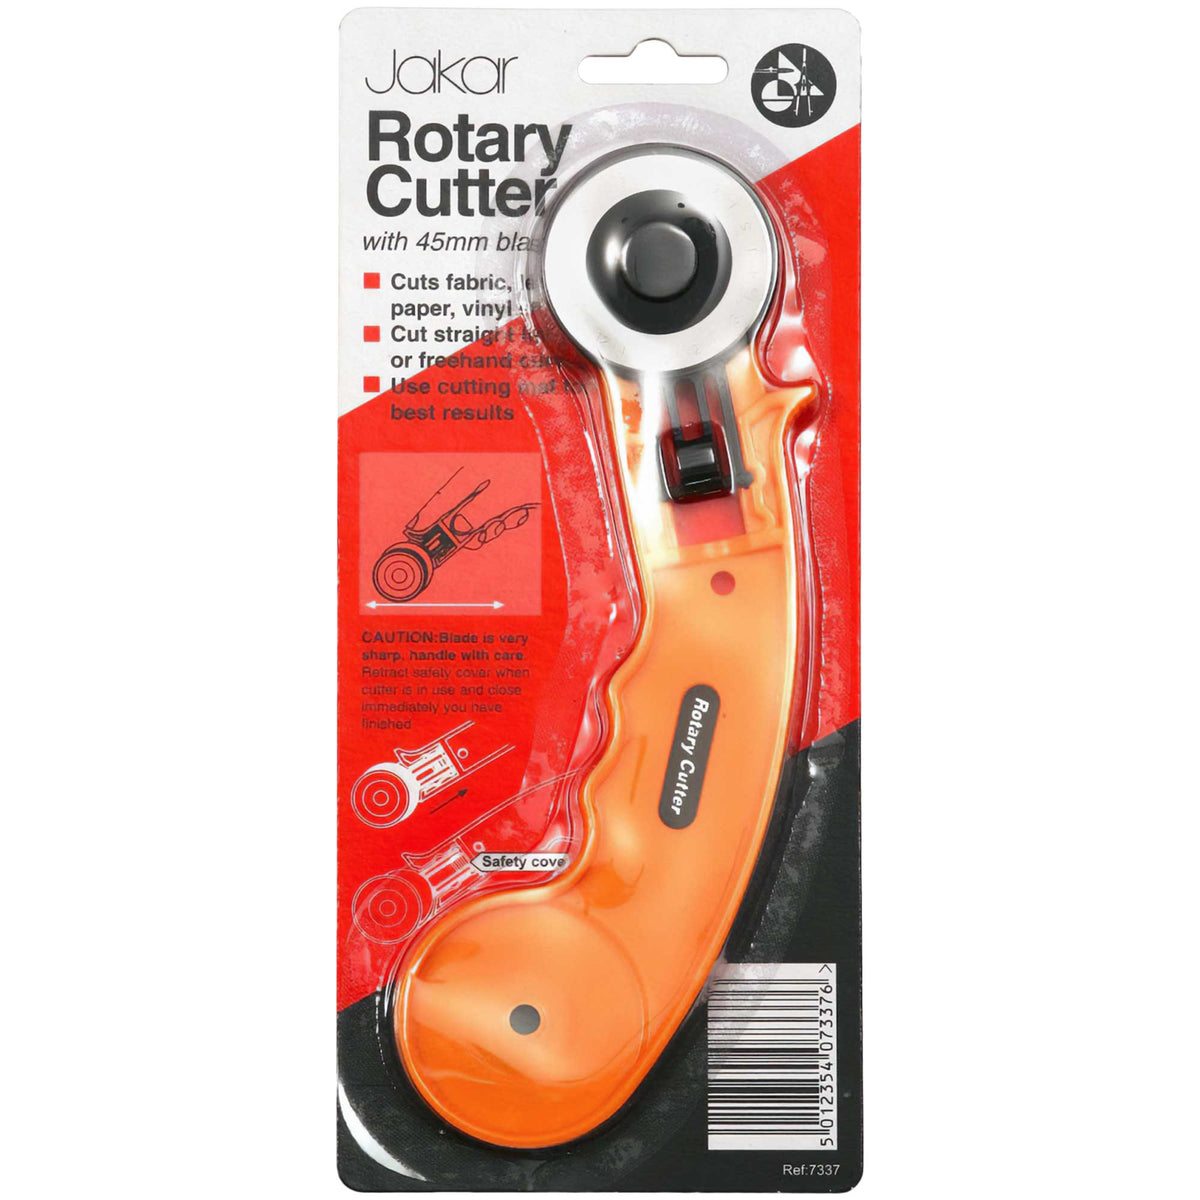 Jakar Rotary Cutter with 45mm Blade